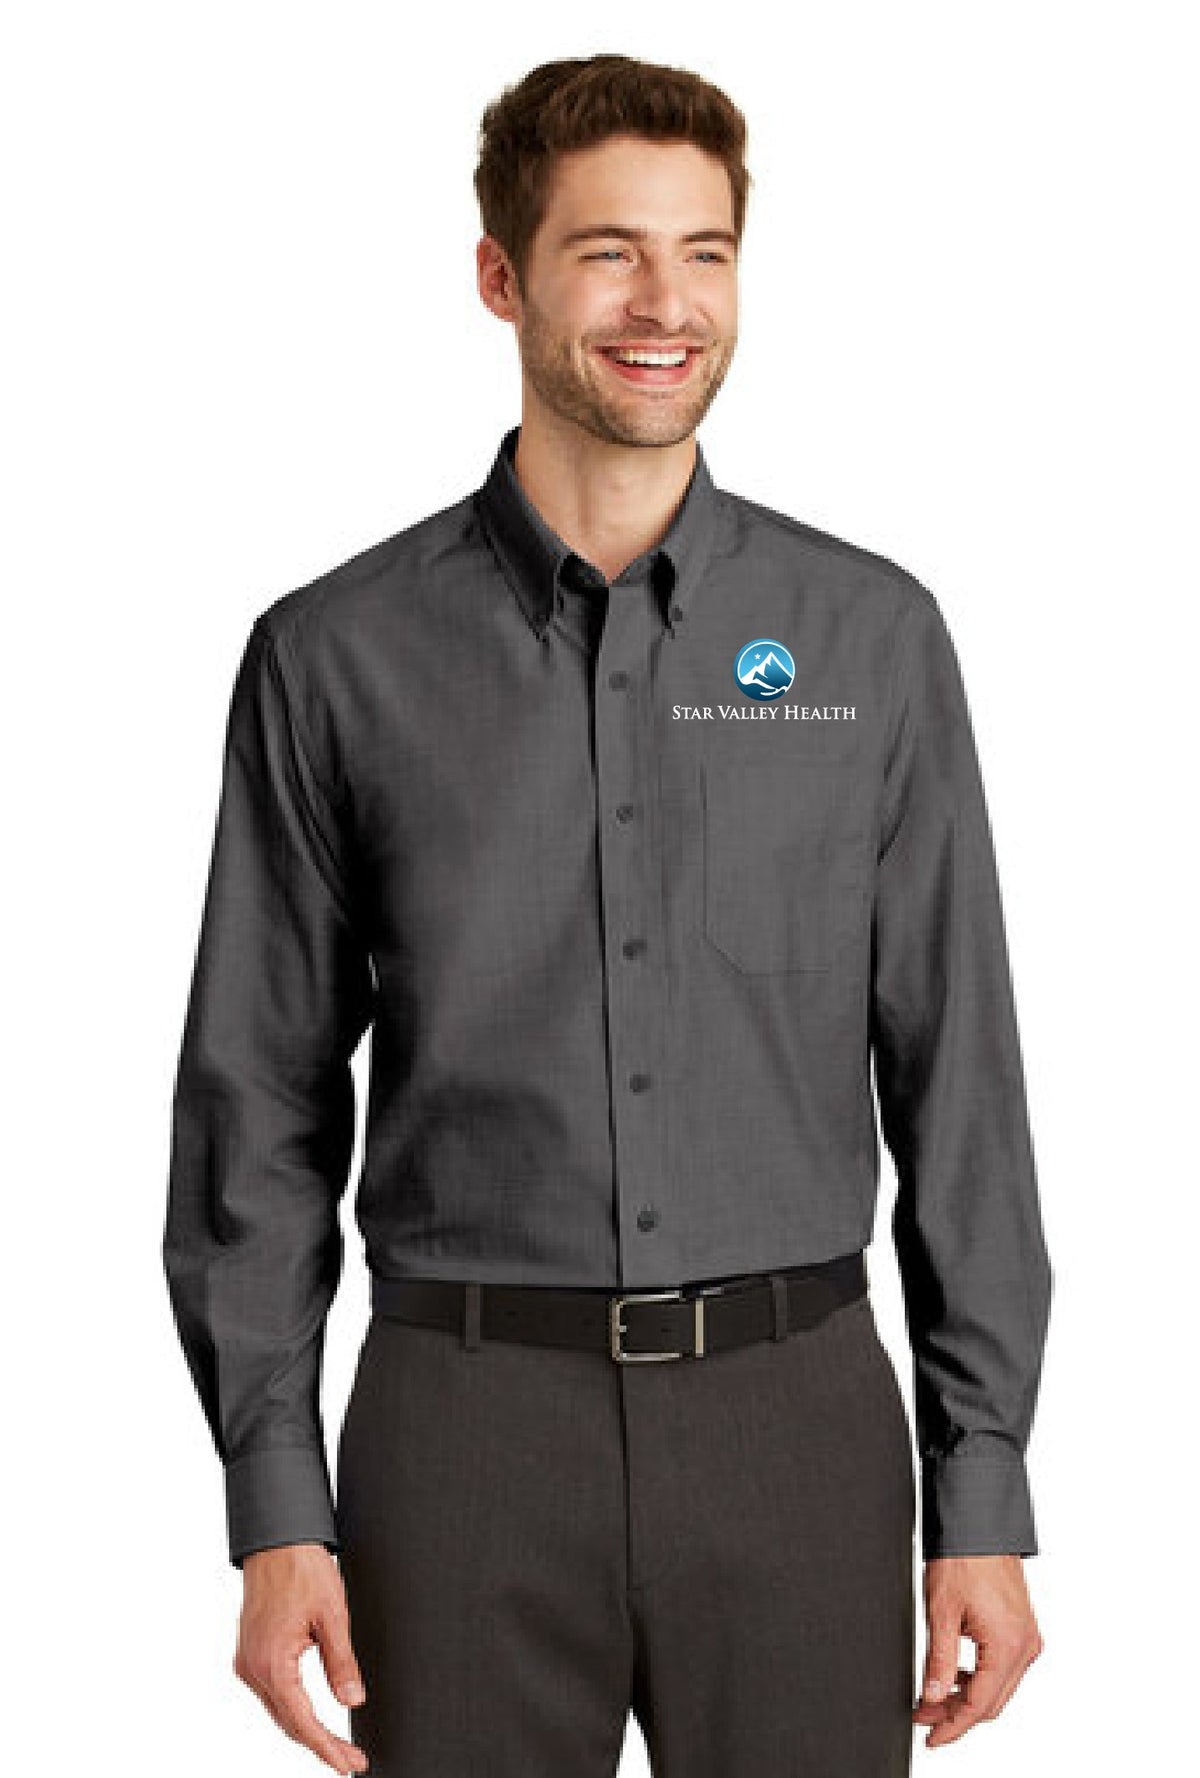 SVH - General Store - S640 Crosshatch Easy Care Shirt